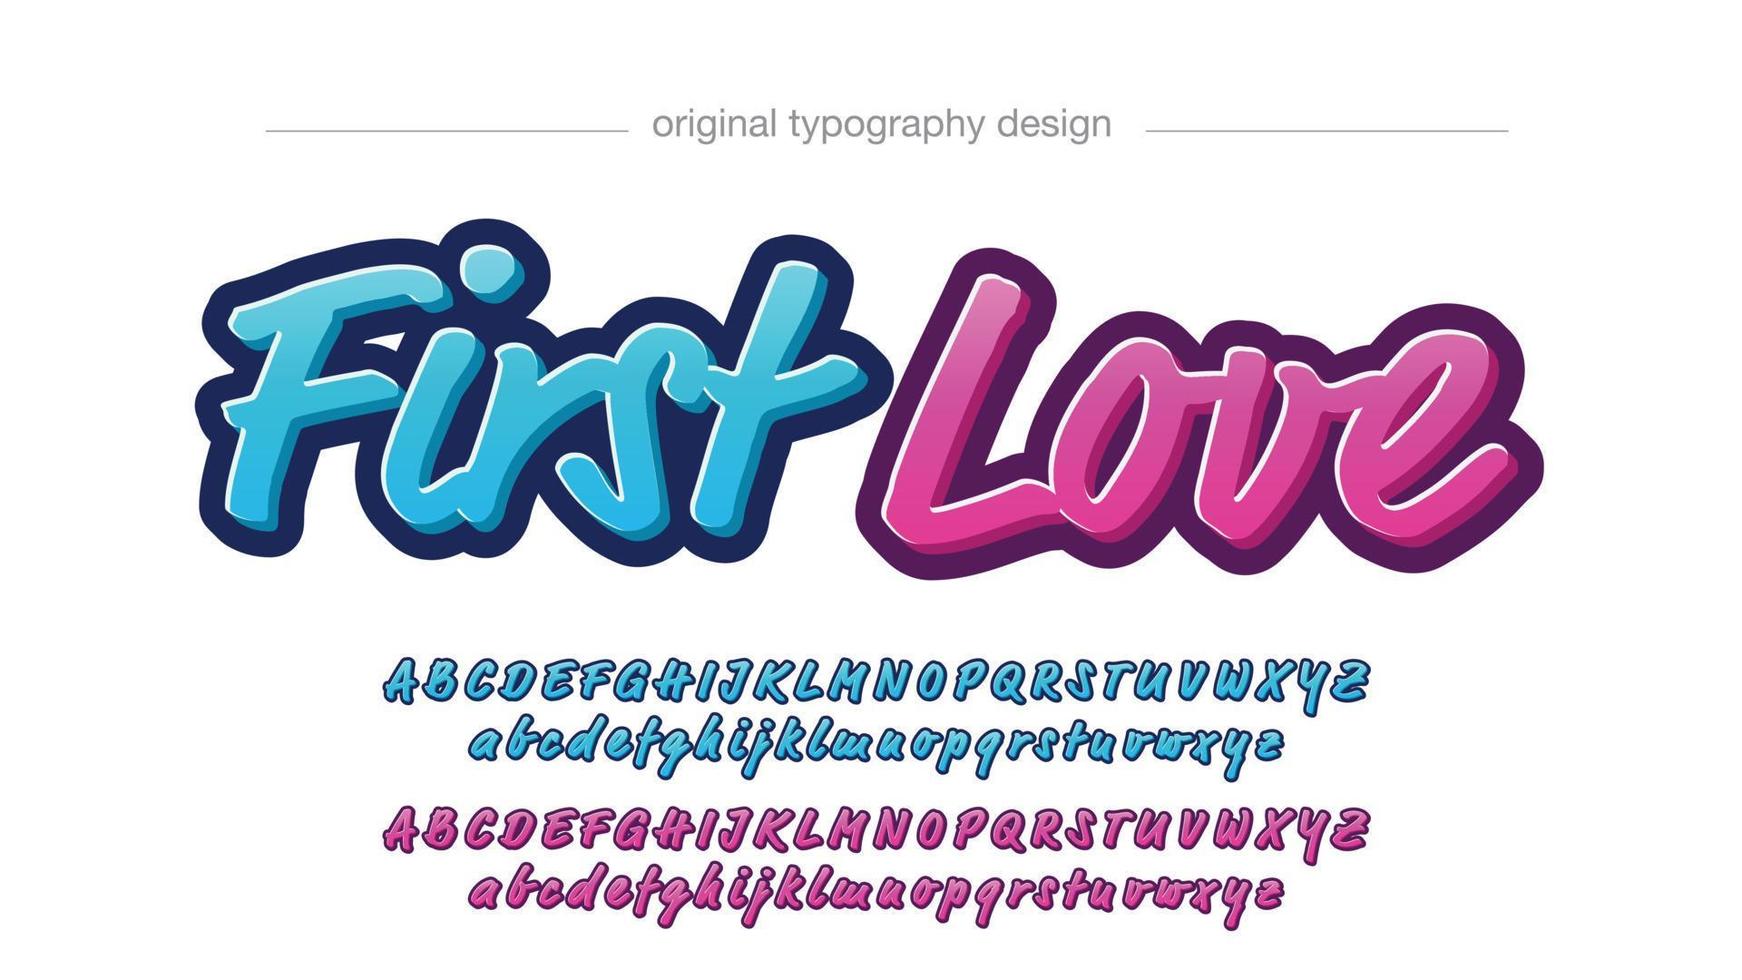 blue and pink 3d cursive text effect vector